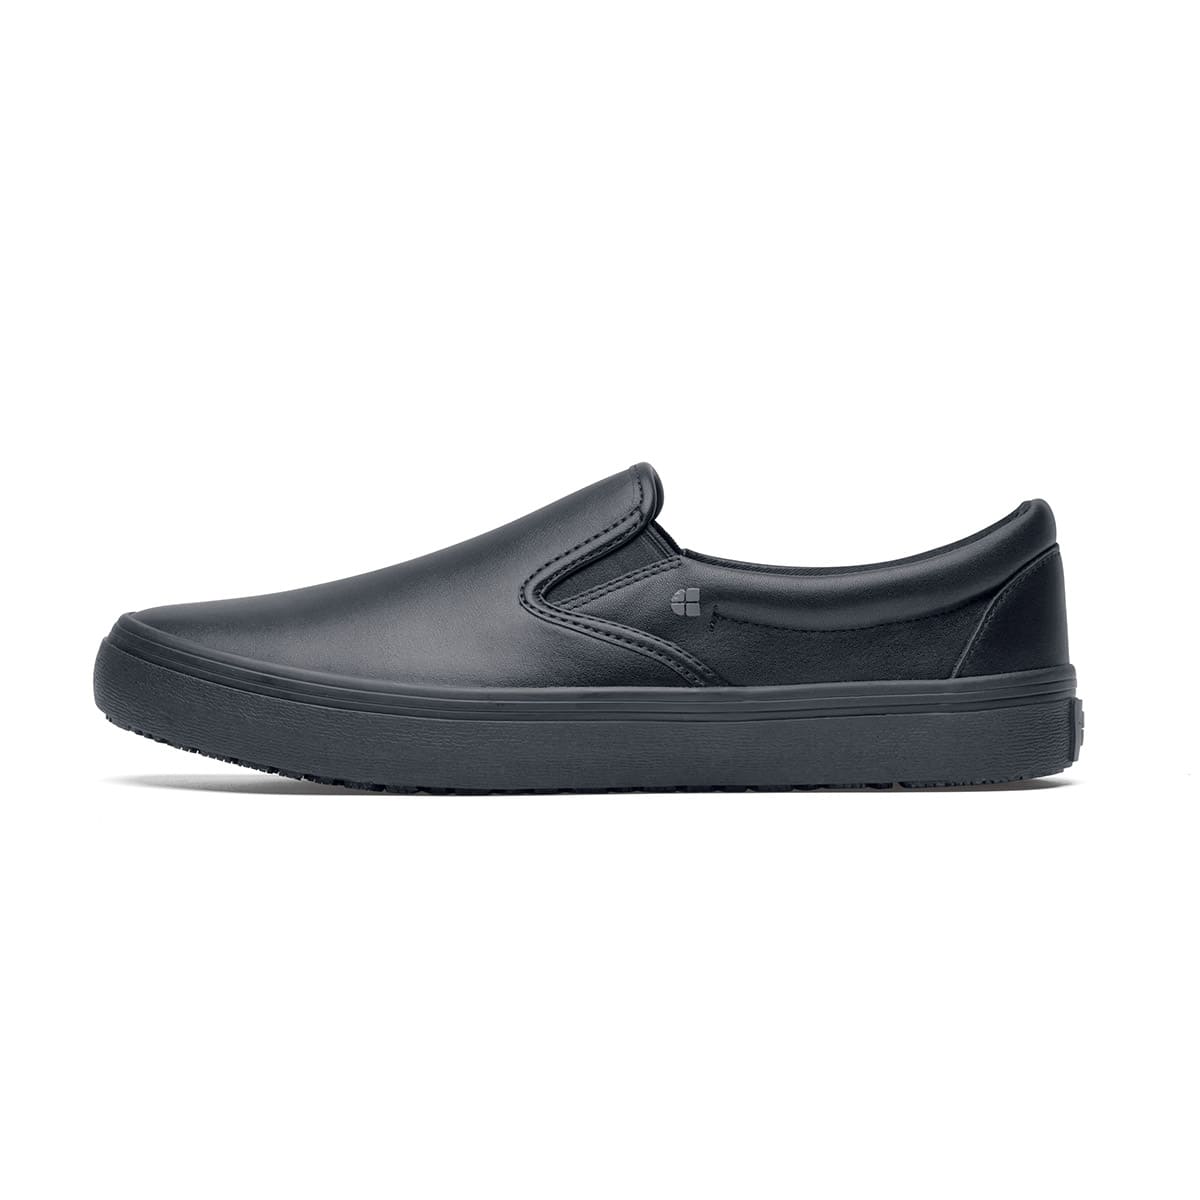 The Merlin Black from Shoes For Crews are slip-on slip resistant shoes with a lightweight design and constructed from genuine leather that has been specially treated to repel liquids from the surface, seen from the left.